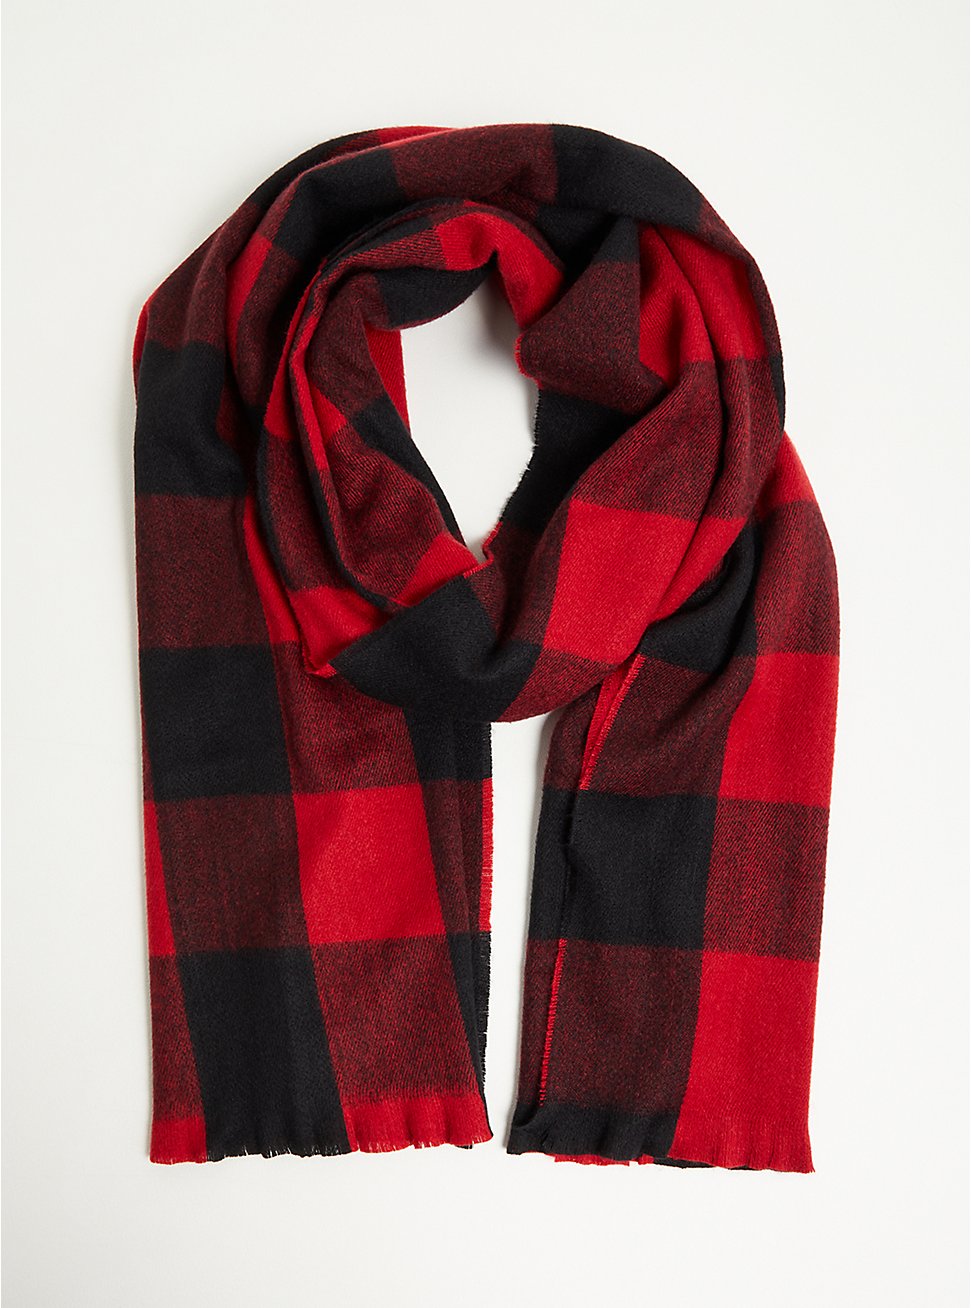 Plus Size Blanket Scarf - Buffalo Check Red & Black, , hi-res